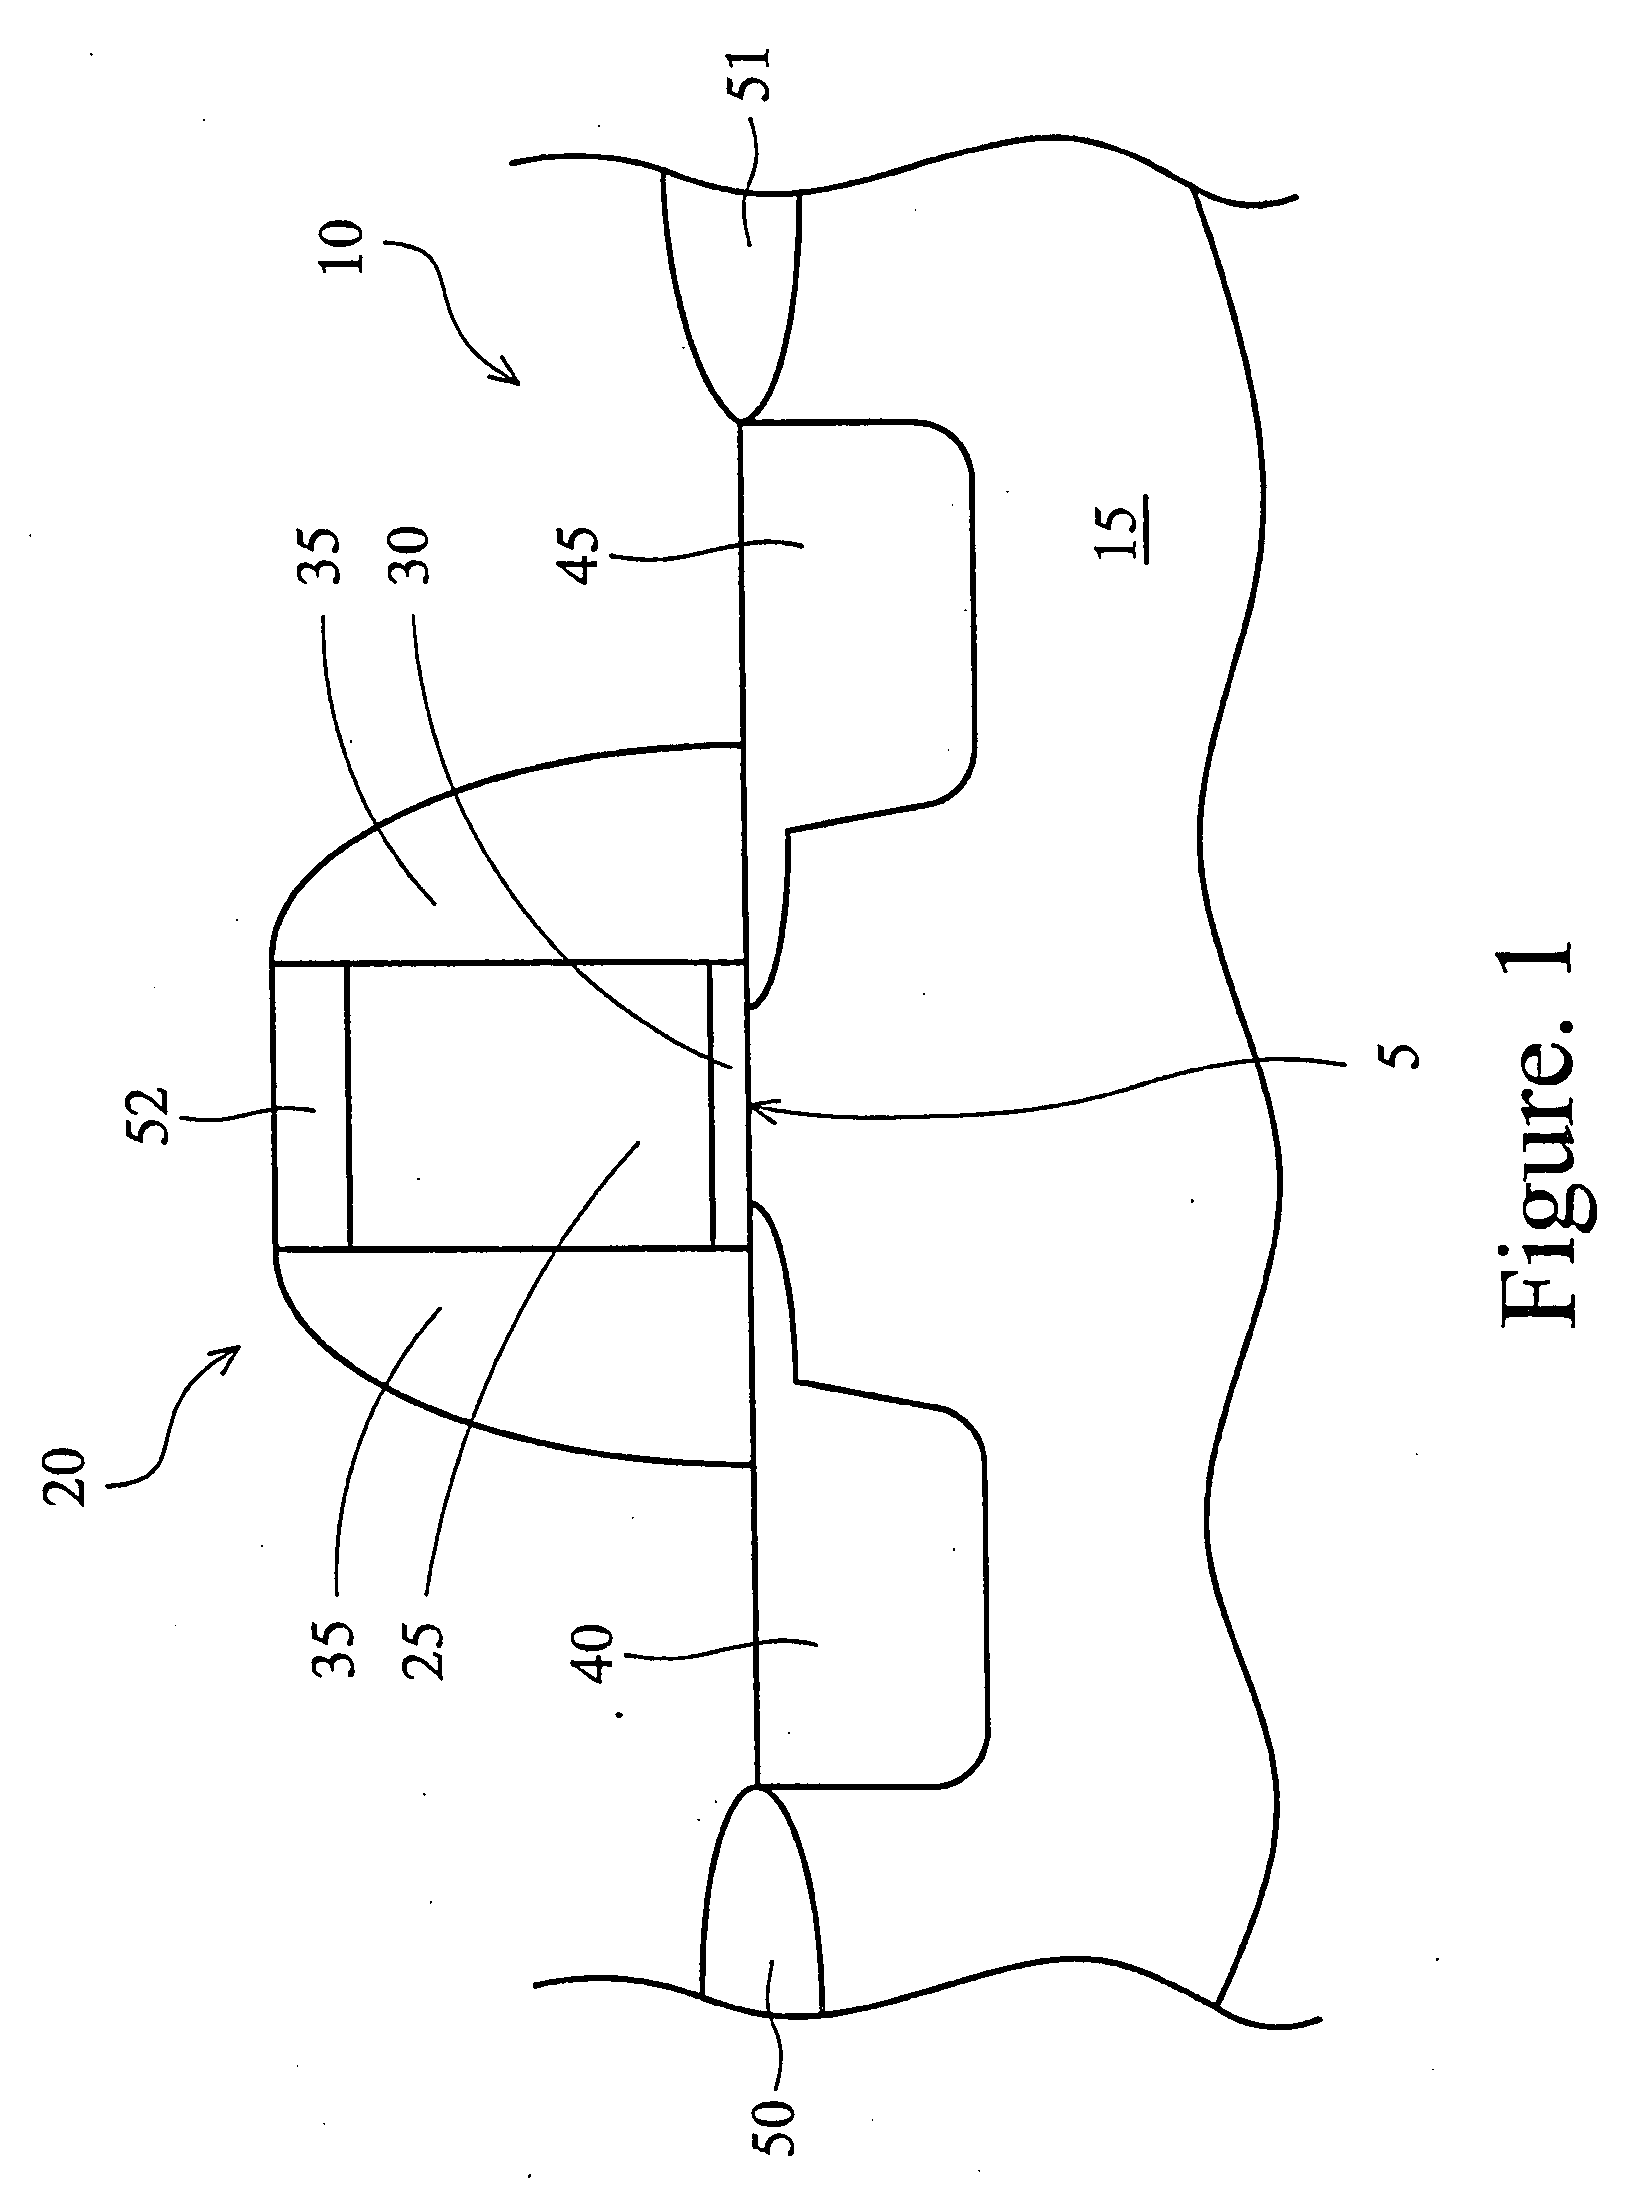 Silicided metal gate for multi-threshold voltage configuration